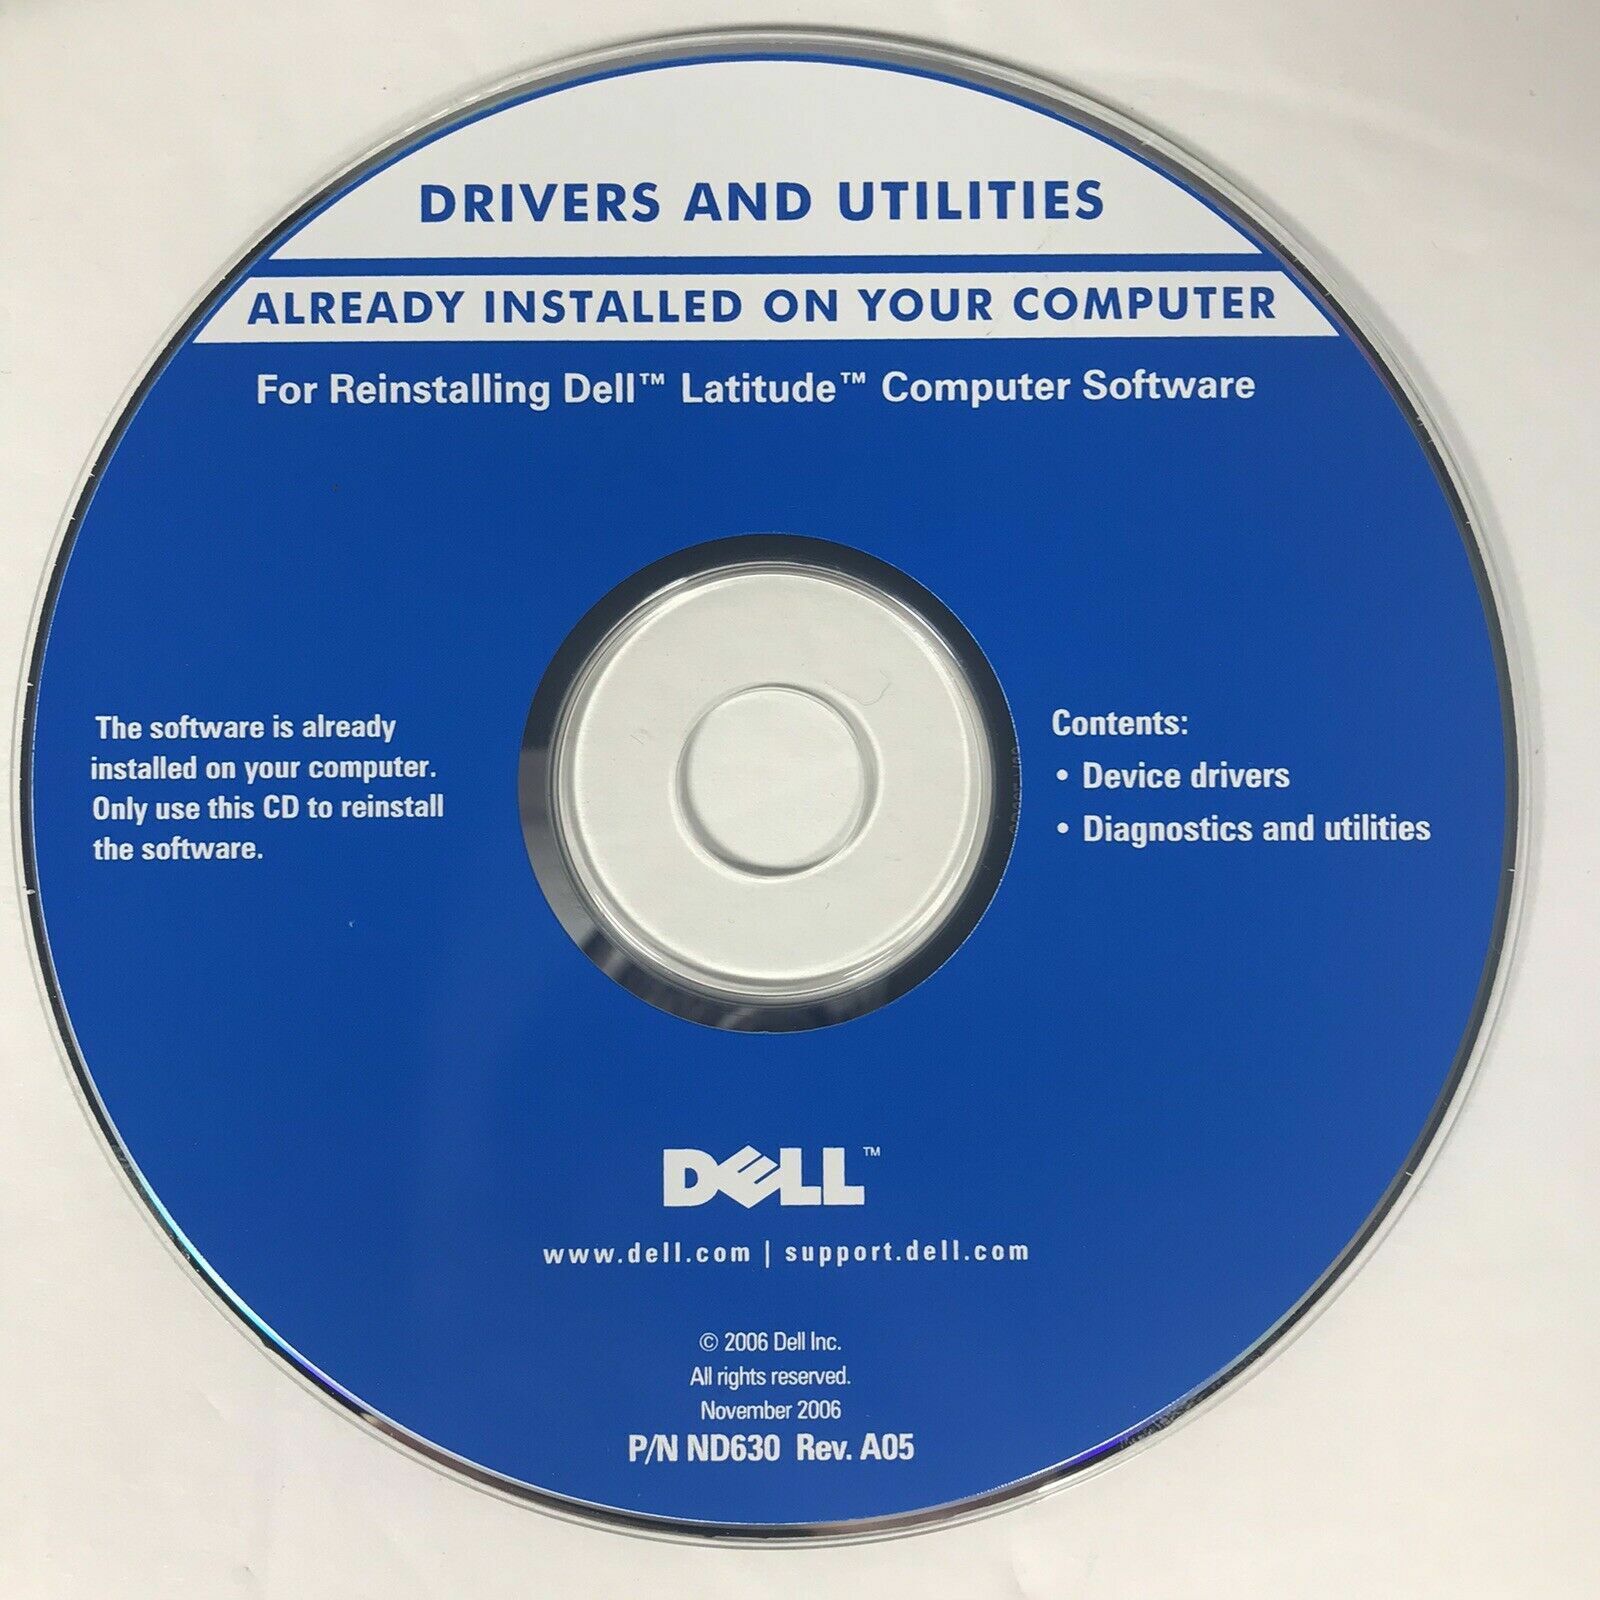 Dell Latitude Drivers & Utilities CD Reinstallation Disk Software 2006 P/N ND630